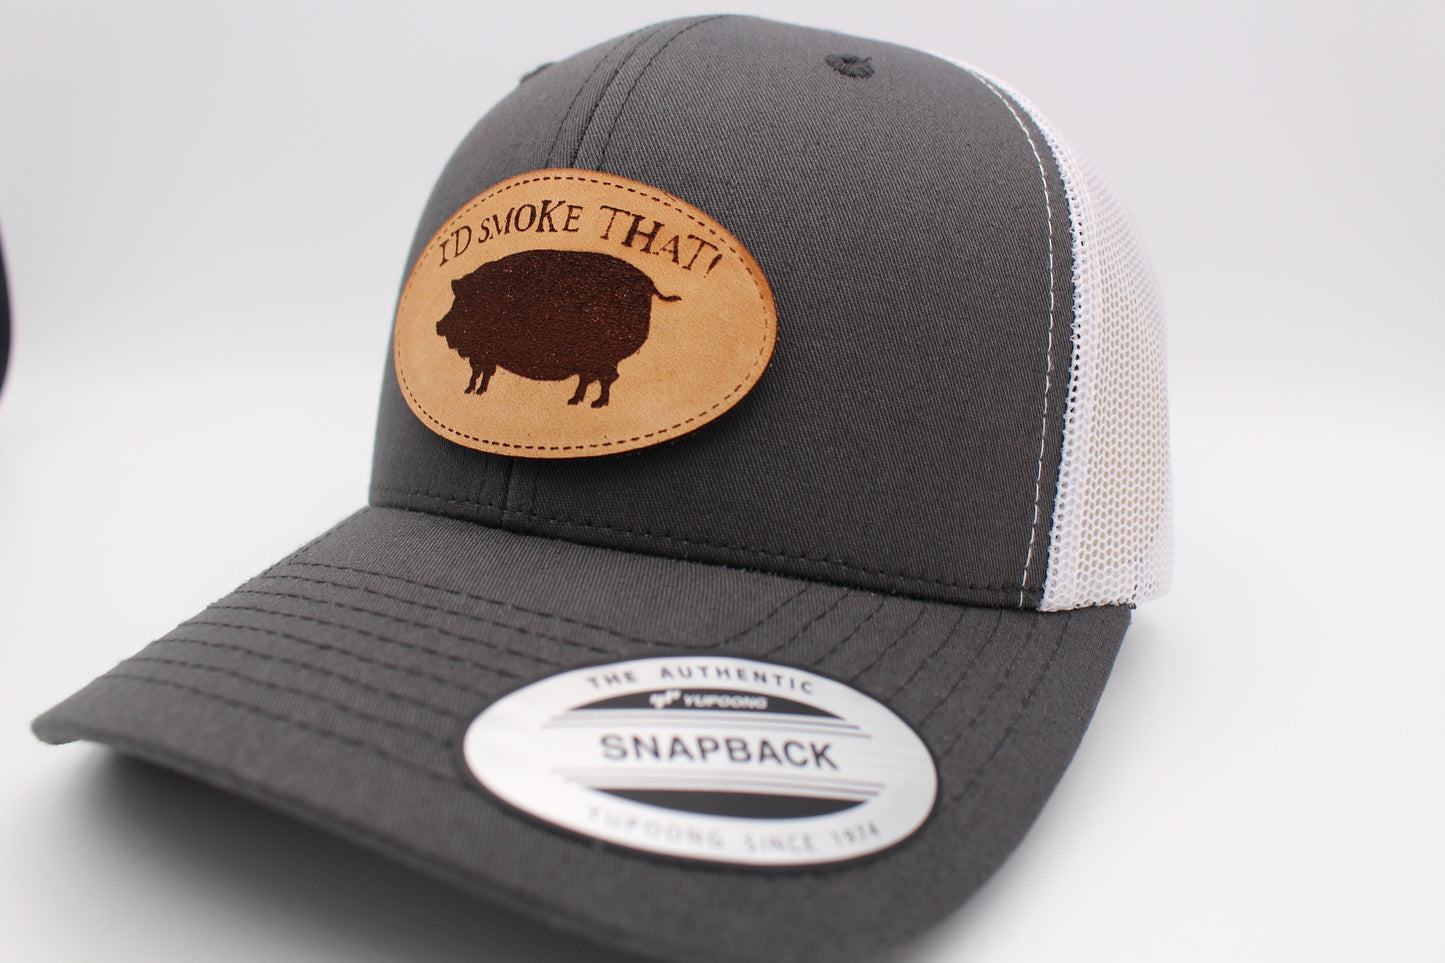 I'D SMOKE THAT! PIG Leather Patch Trucker Hat